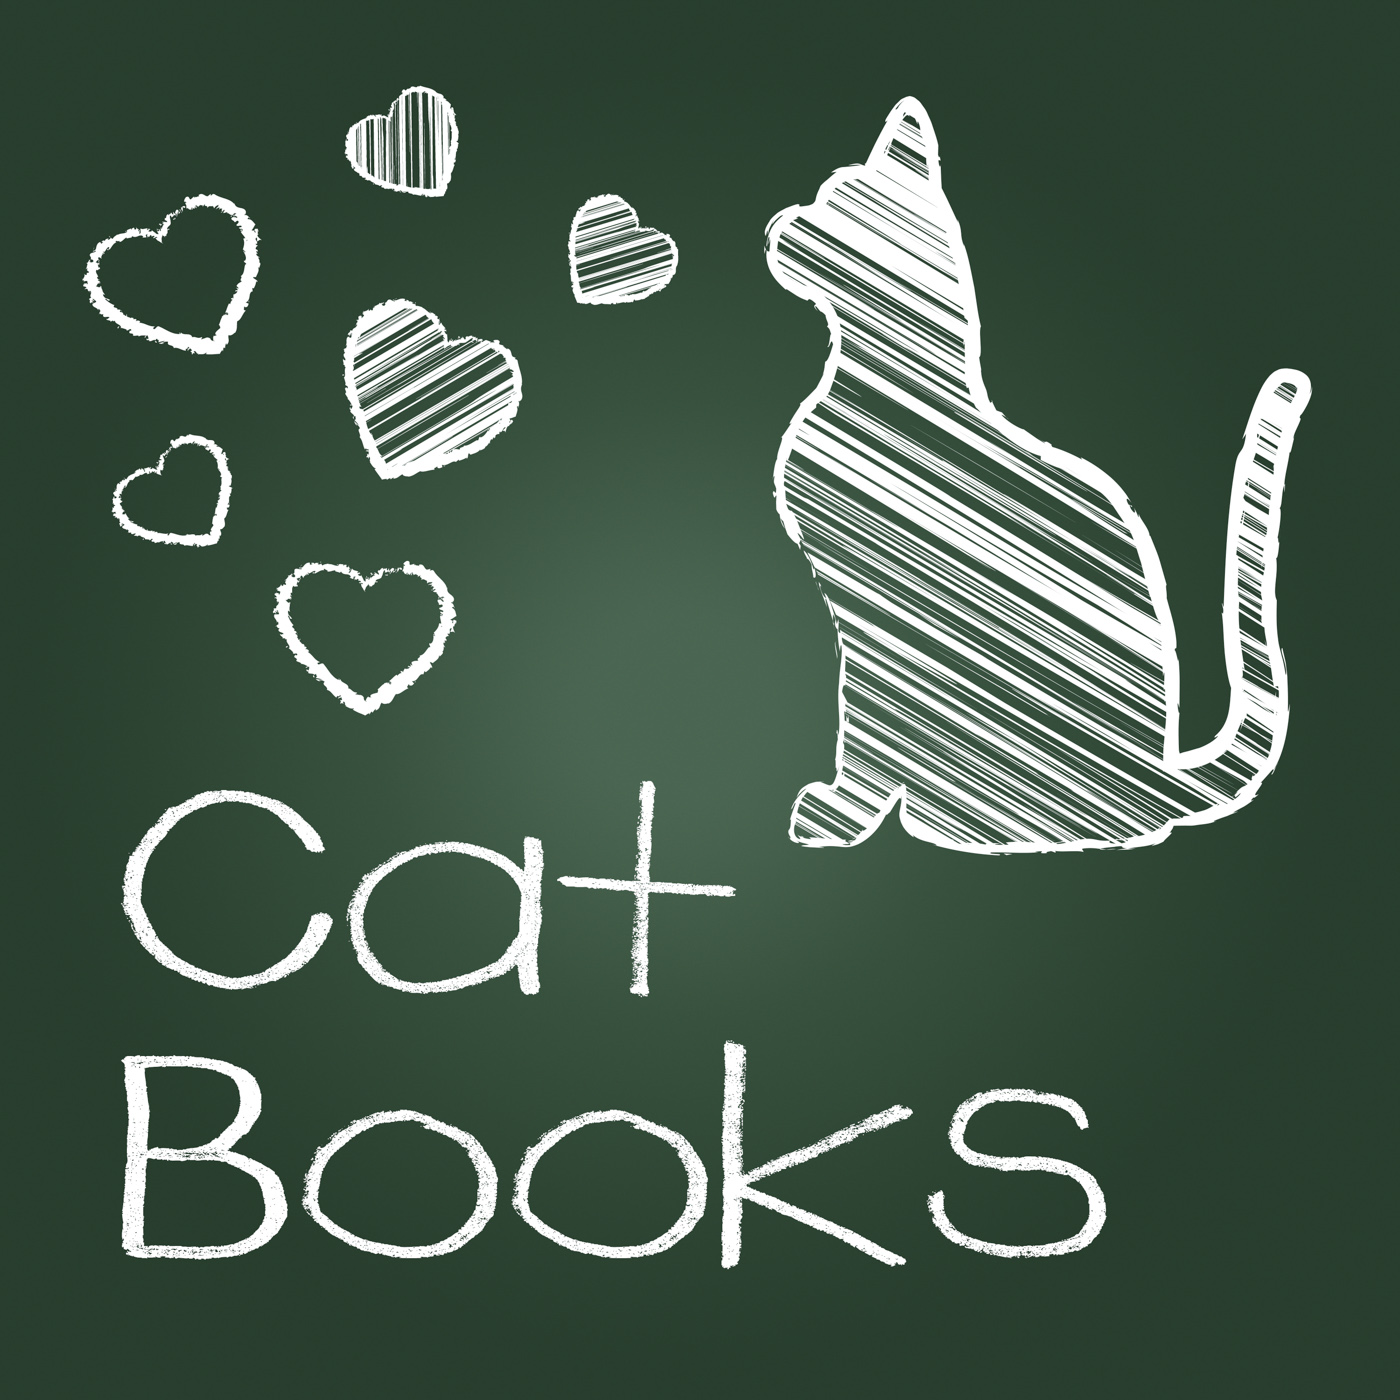 Cat books means pets cats and felines photo